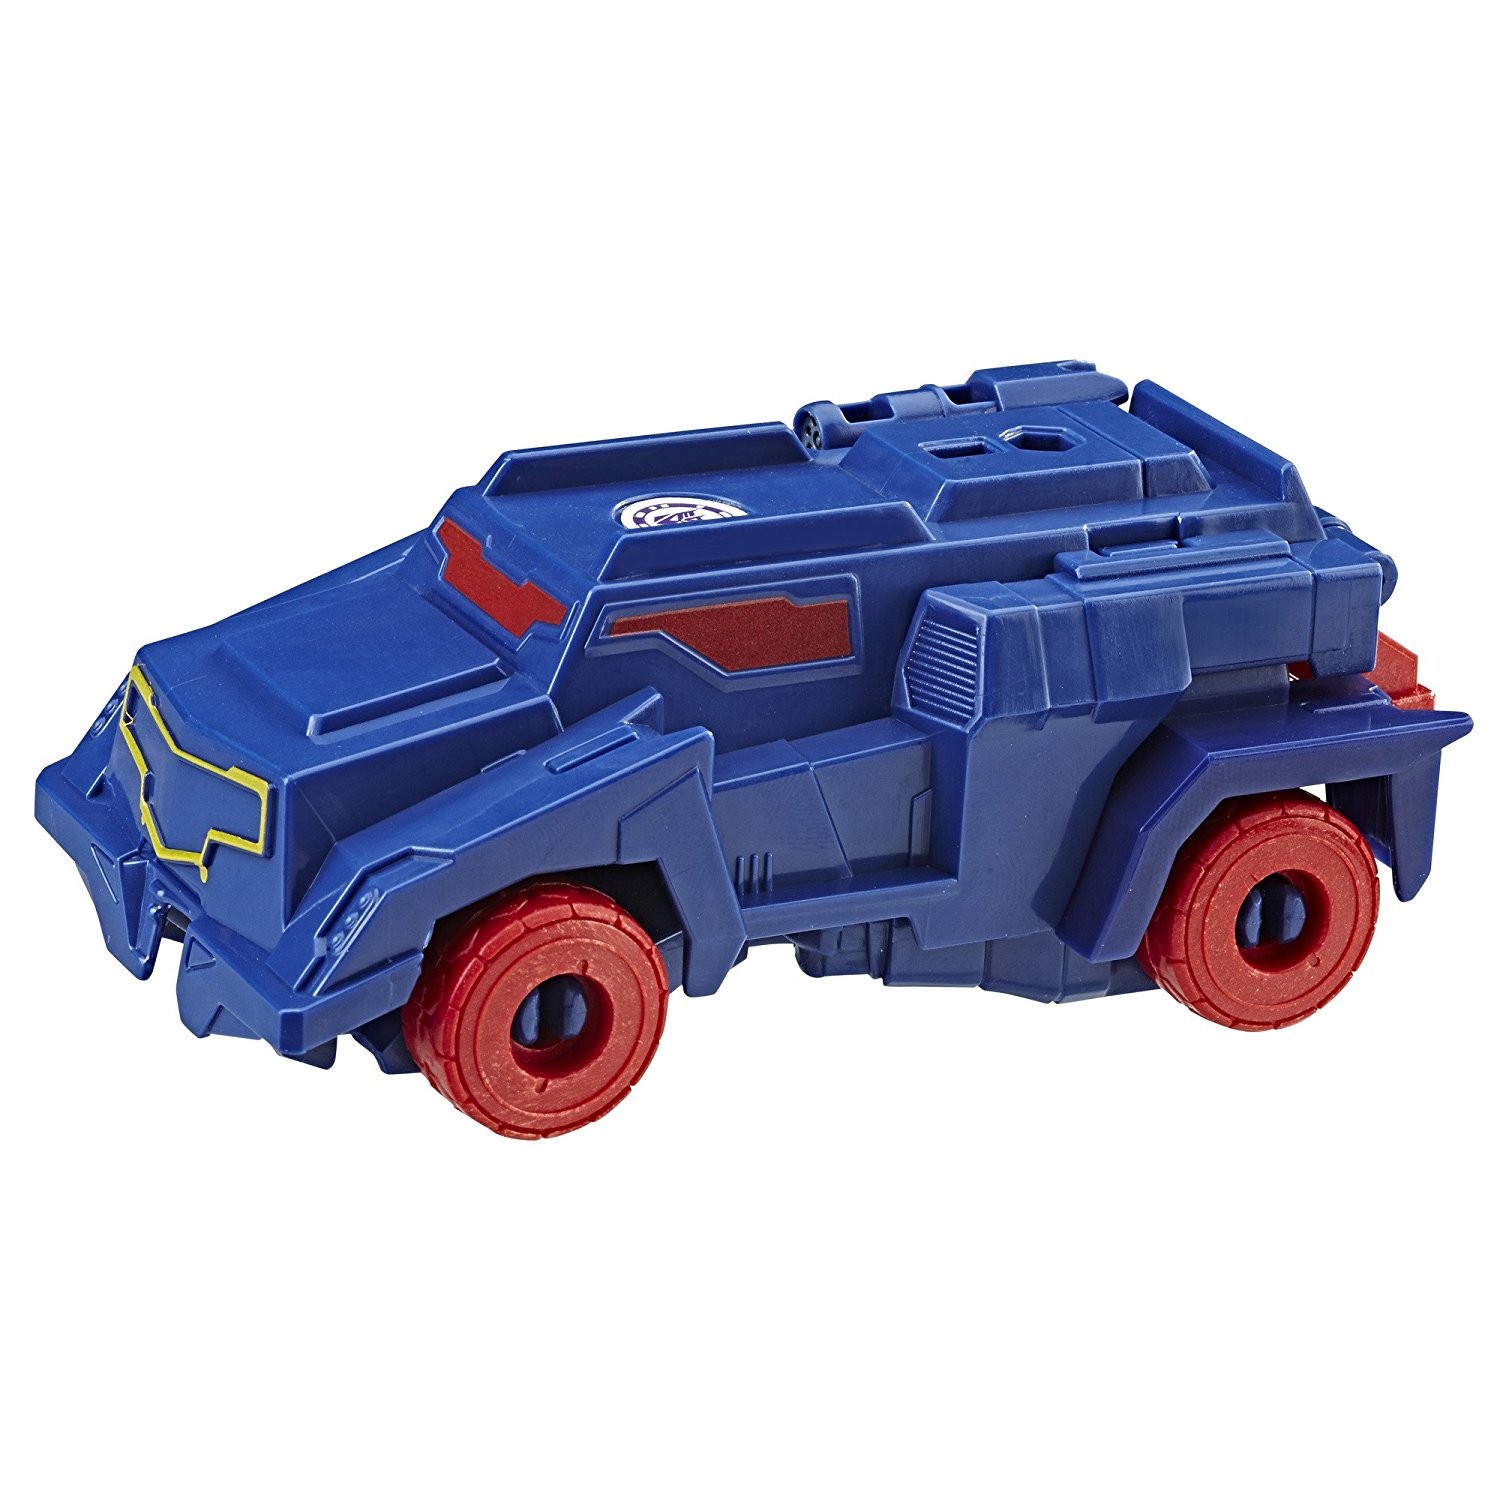 Transformers News: Re: Transformers: Robots in Disguise Products - Combiner Force and More